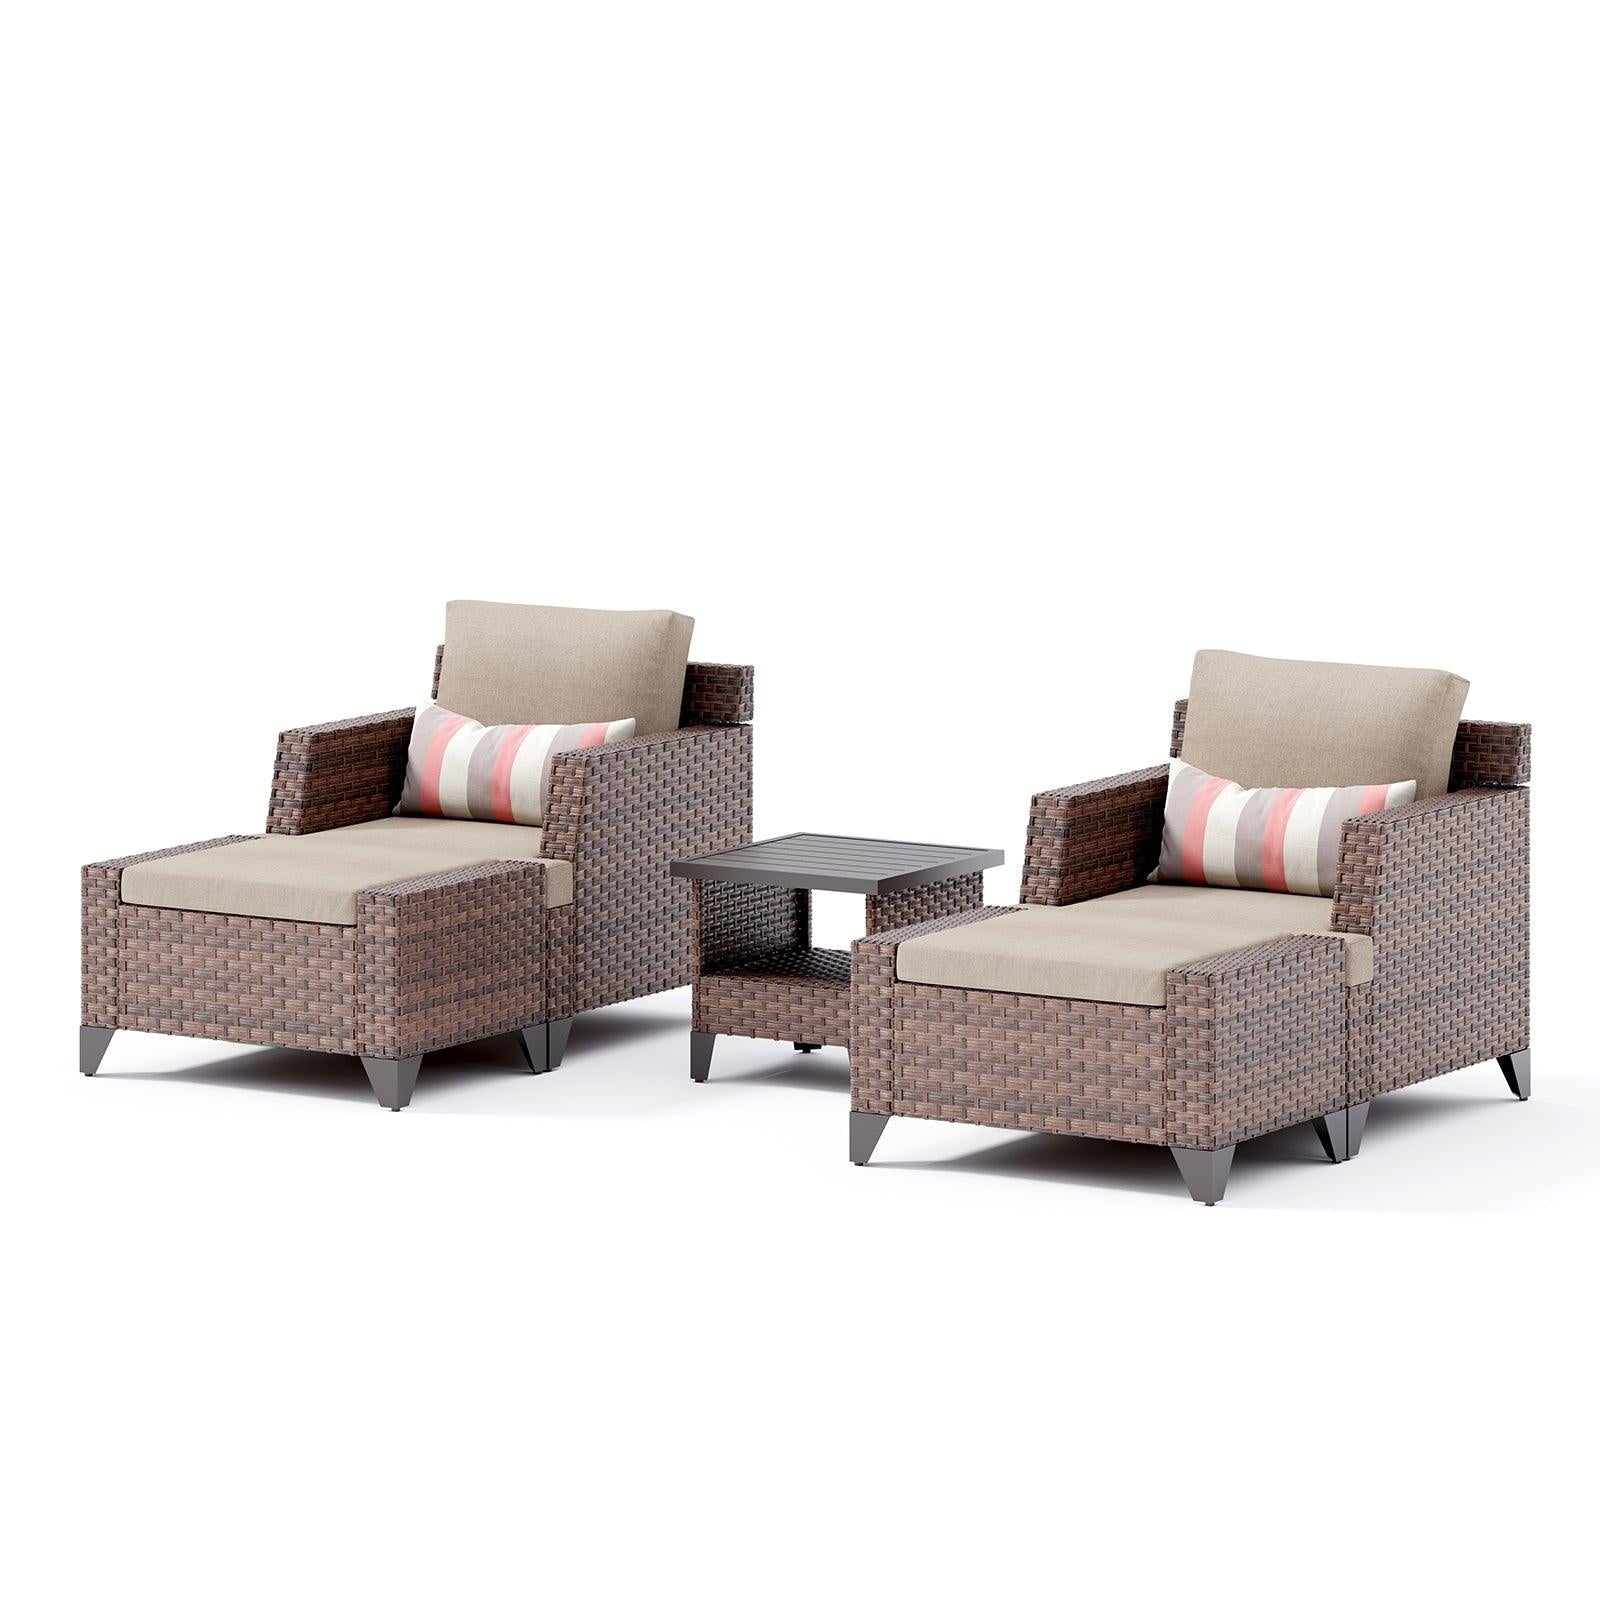 Charleston-II 5-pc. Outdoor Sectional Set with Ottomans sale